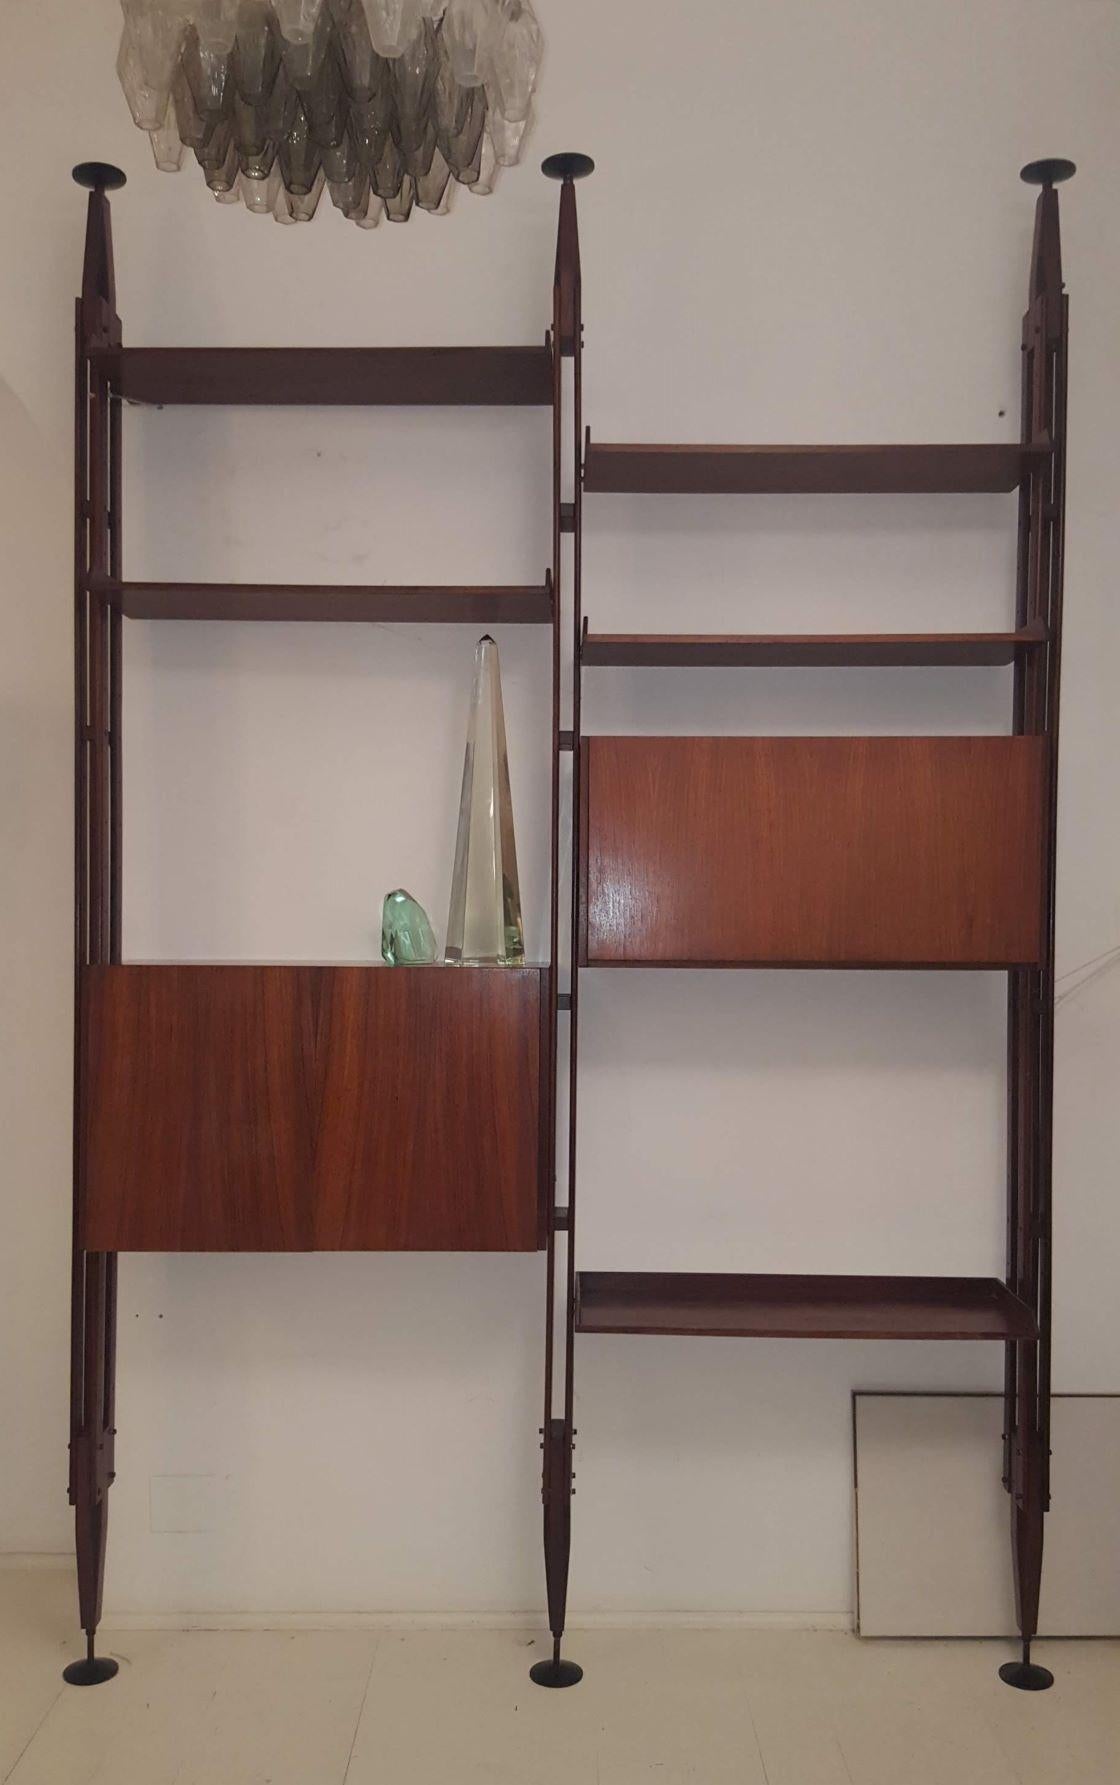 Franco Albini LB7 bookcase for Poggi, 1957.
Signed under the feet. Rosewood shelves and cabinets,
tree rosewood upright supports, five shelves and two cabinet. Adjustable black lacquered aluminum braces at top and bottom.
Very good original